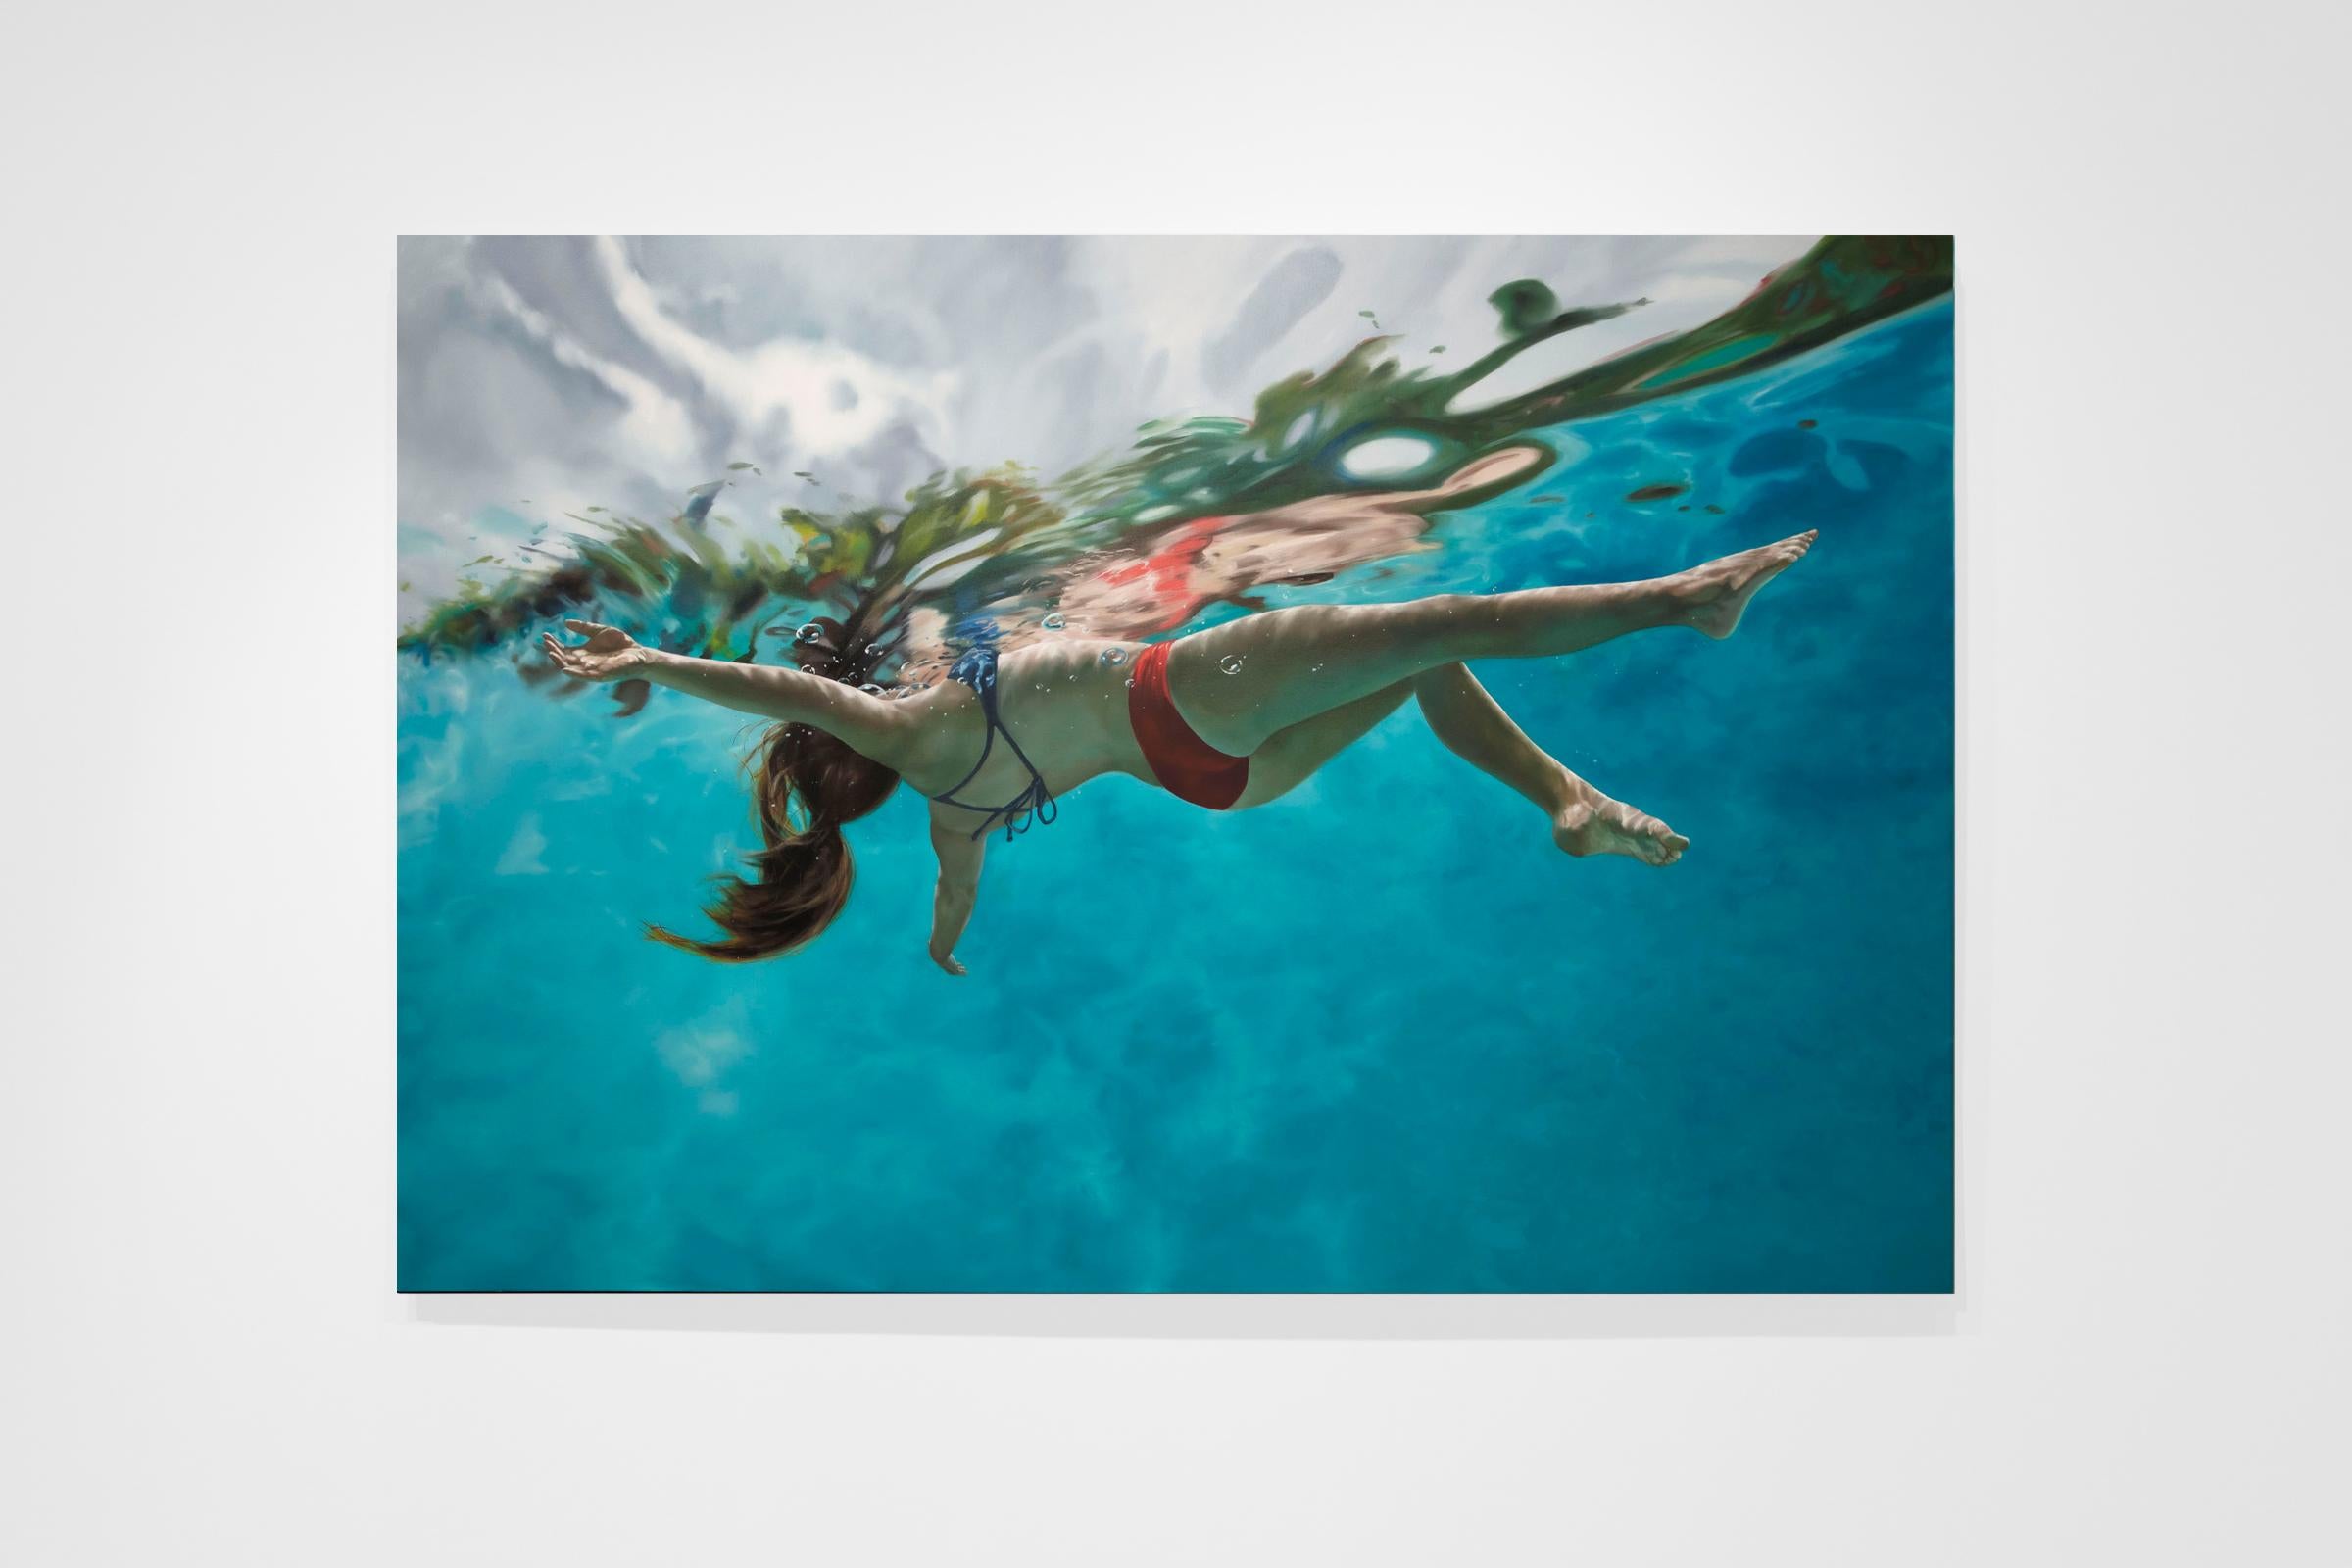 ETHEREAL- Blue Water / Female Swimmer / Floating Free / Photorealism - Painting by Eric Zener